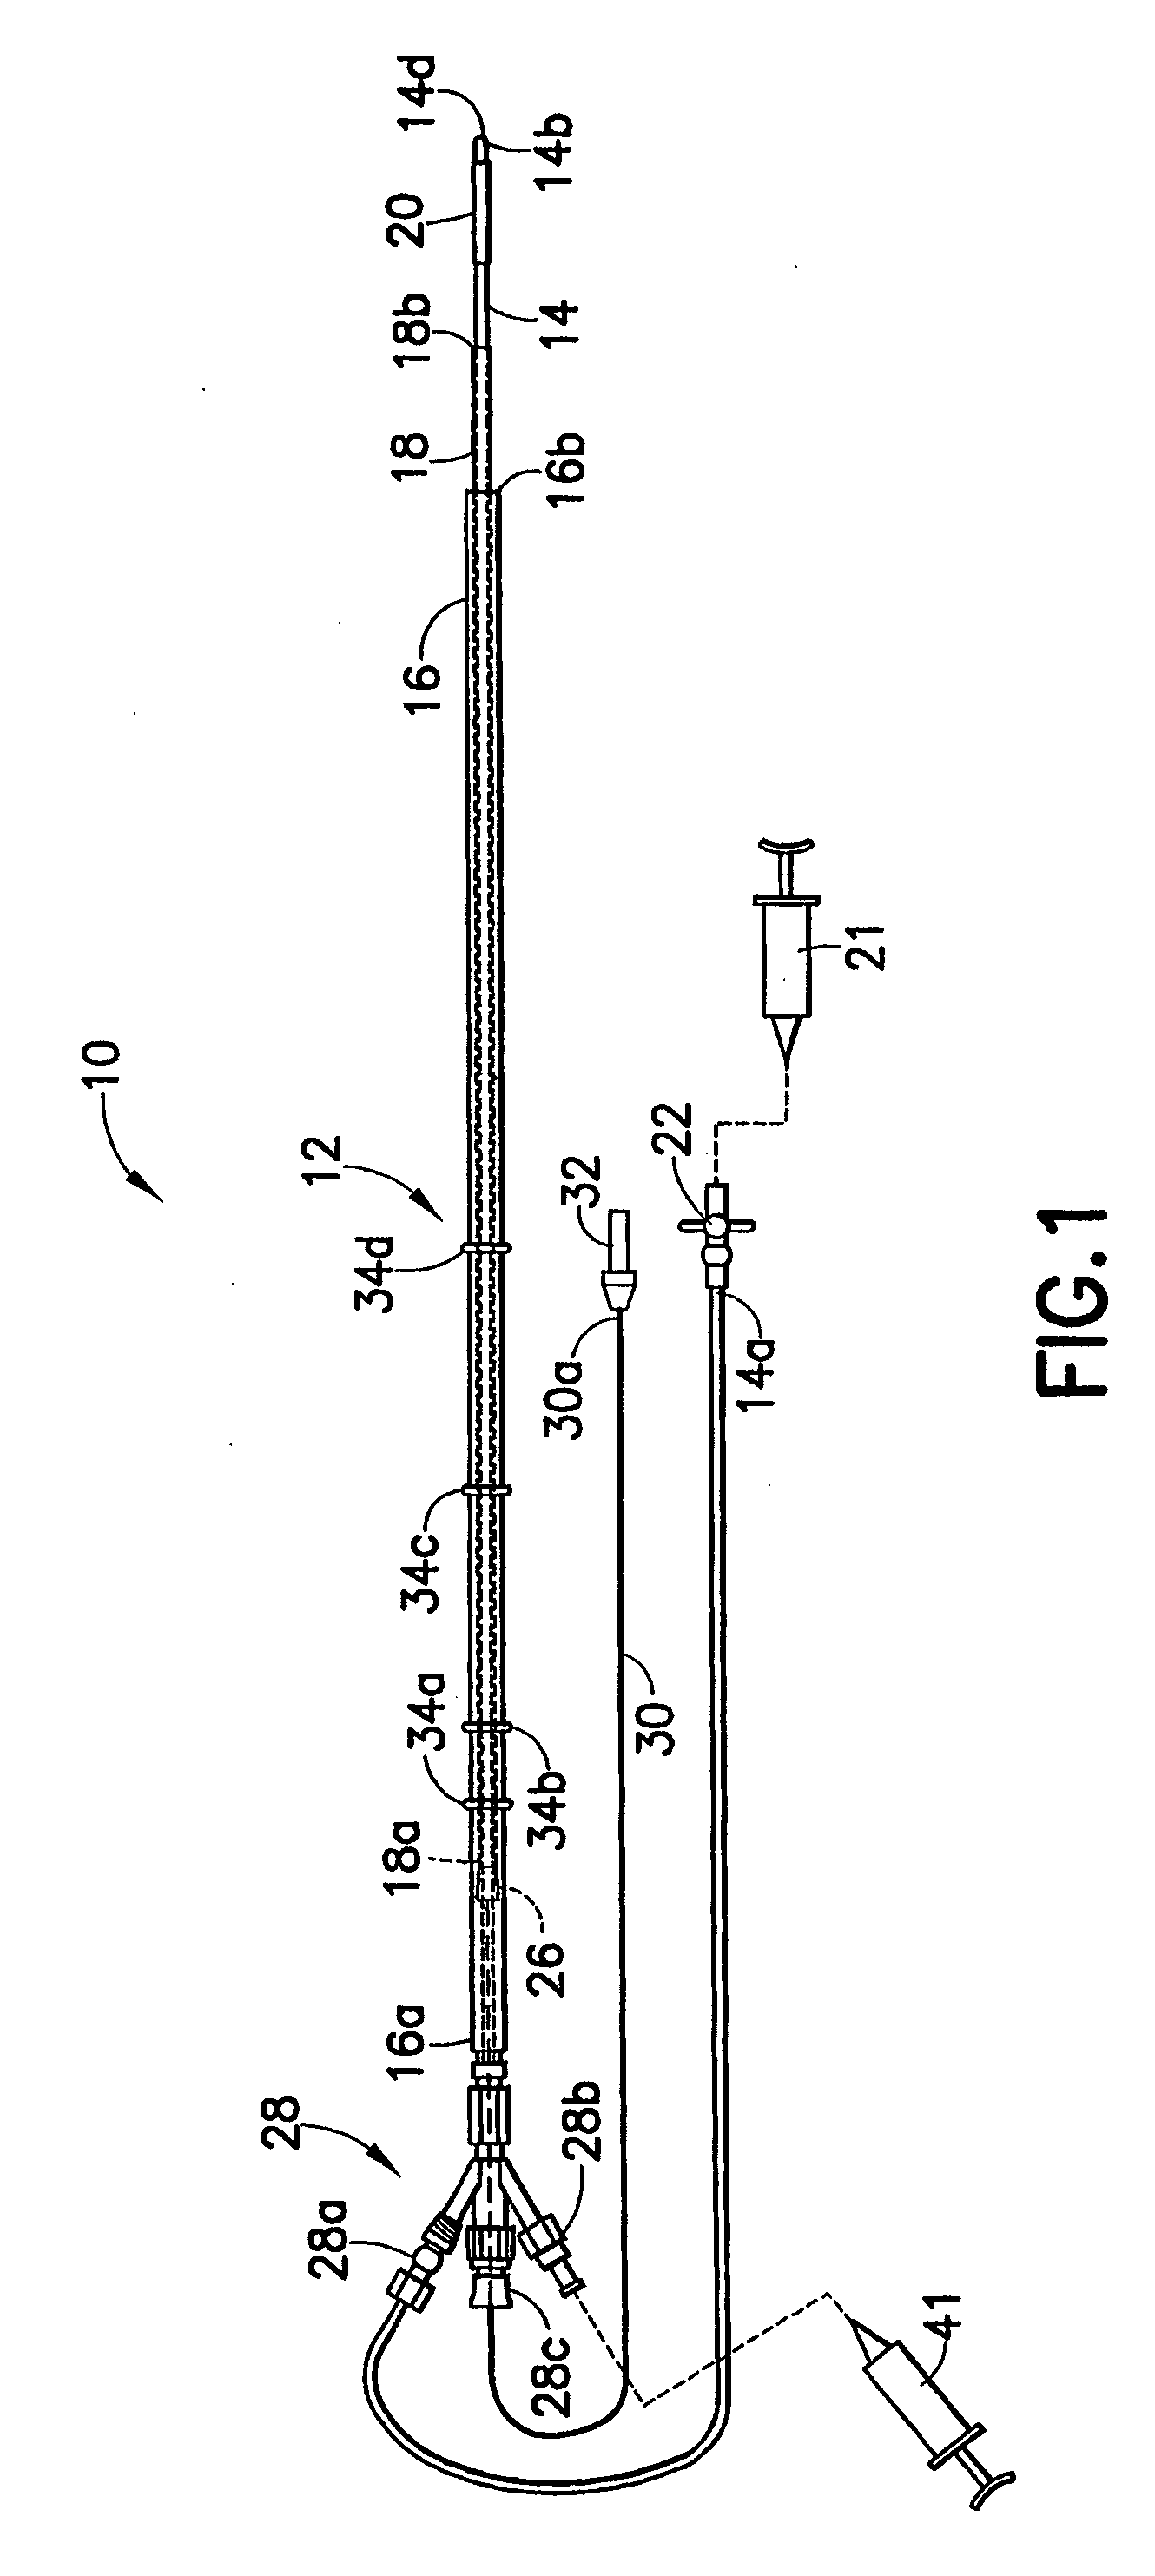 Methods and apparatus for treating the interior of a blood vessel